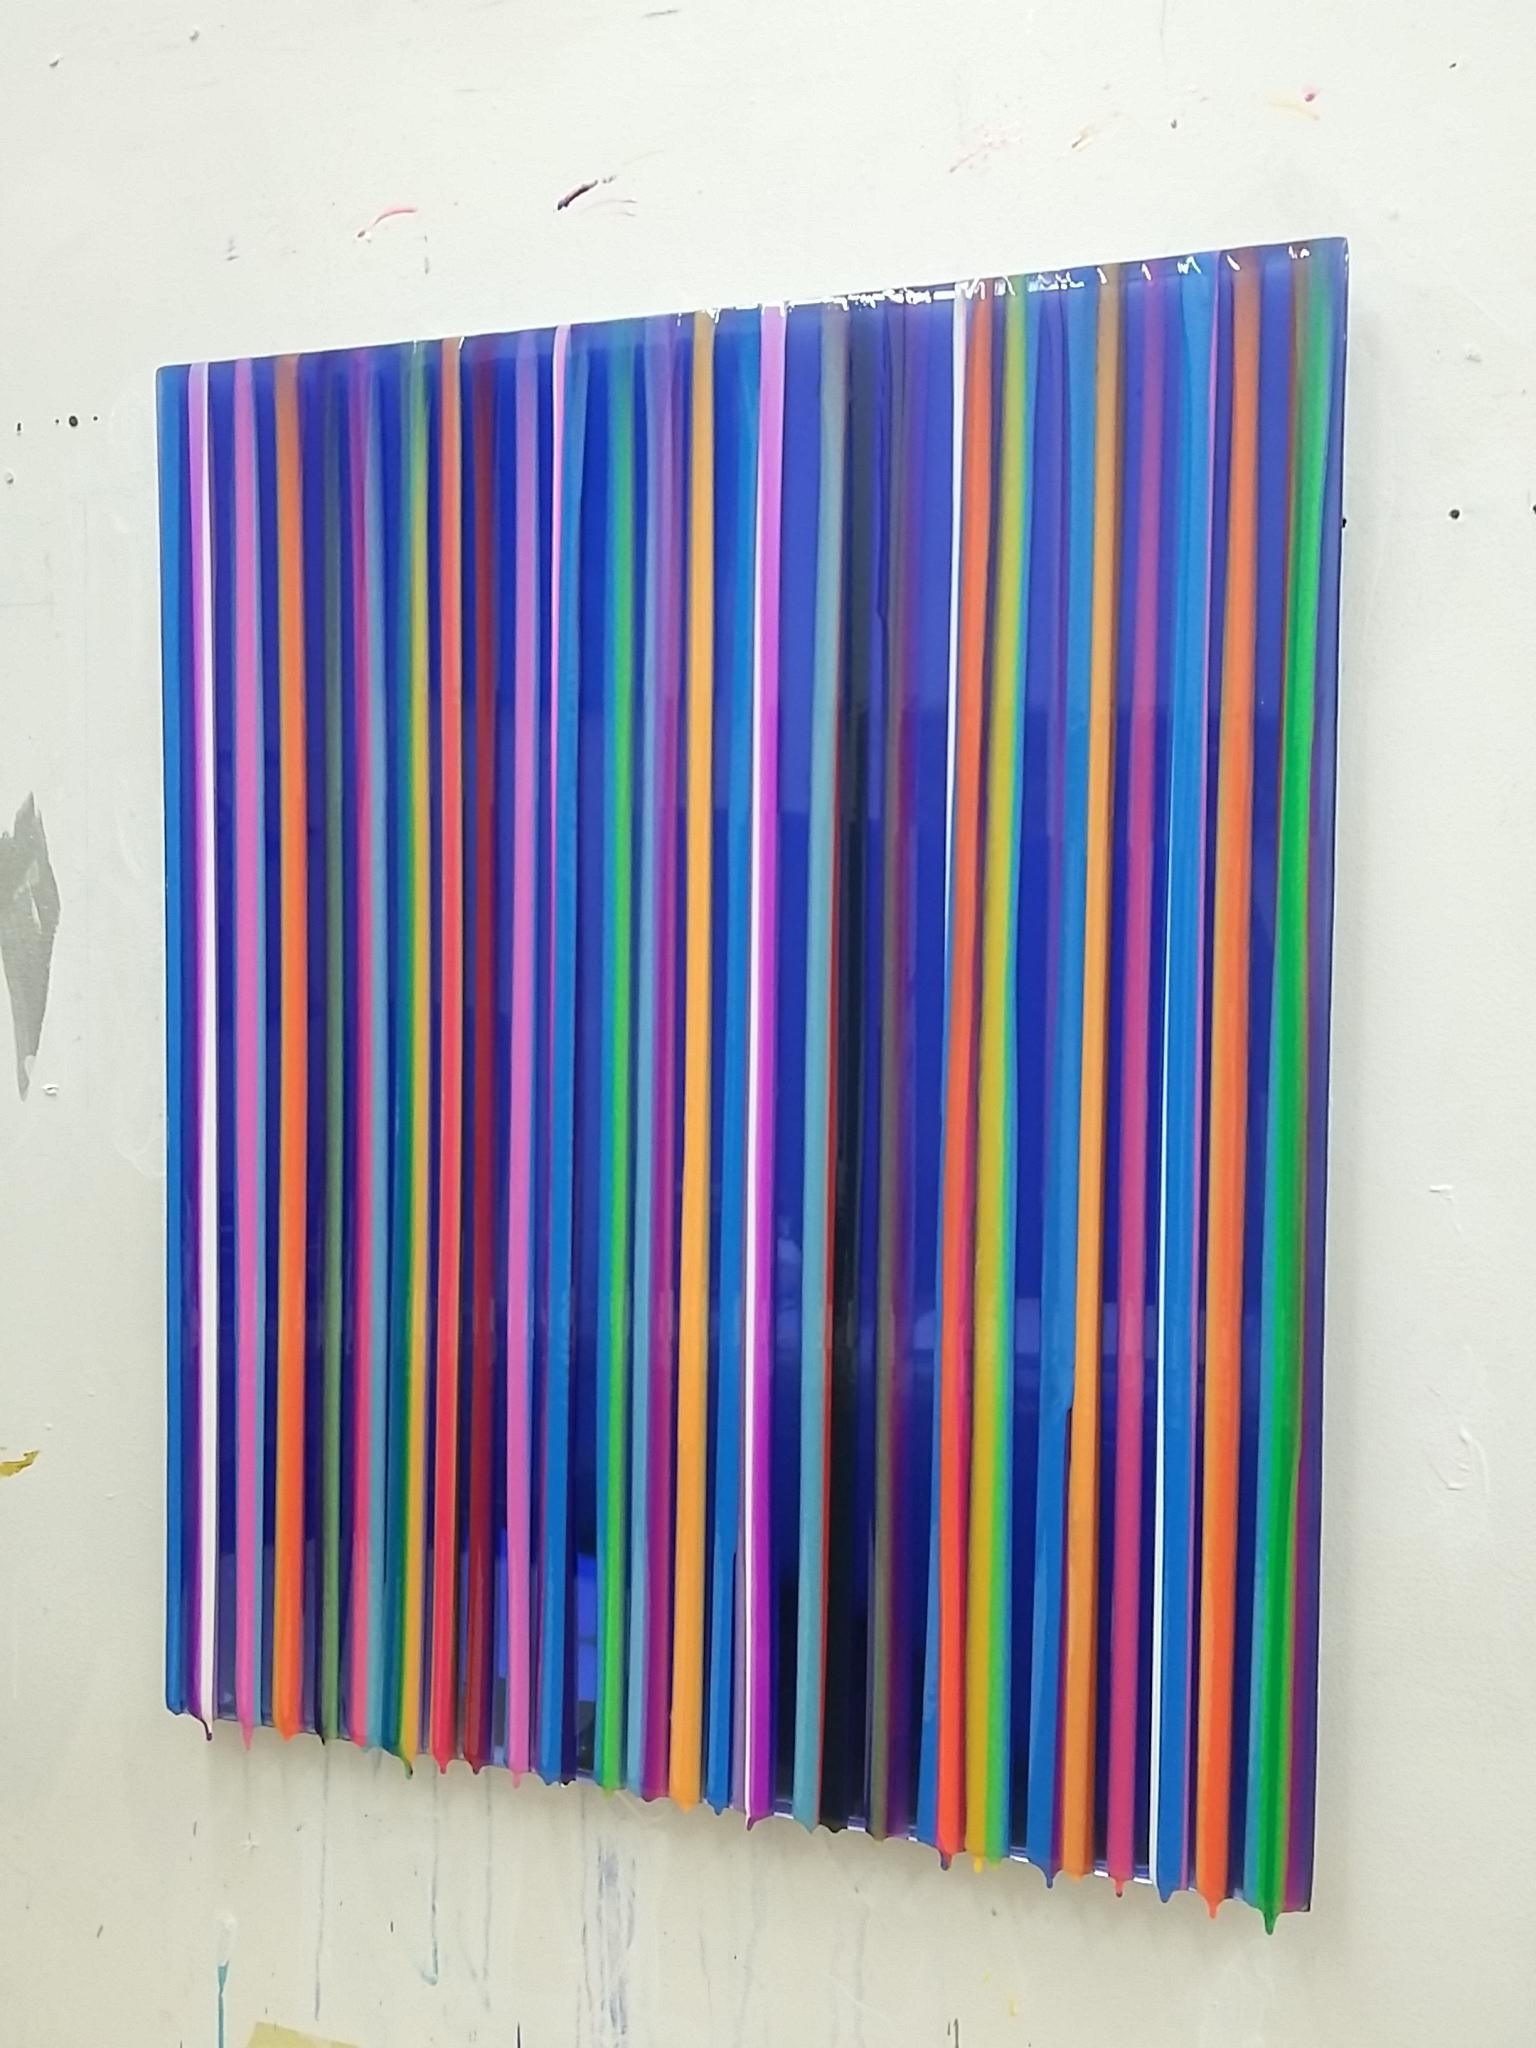 S1903 glossy multi colored striped painting - Painting by Cathy Choi